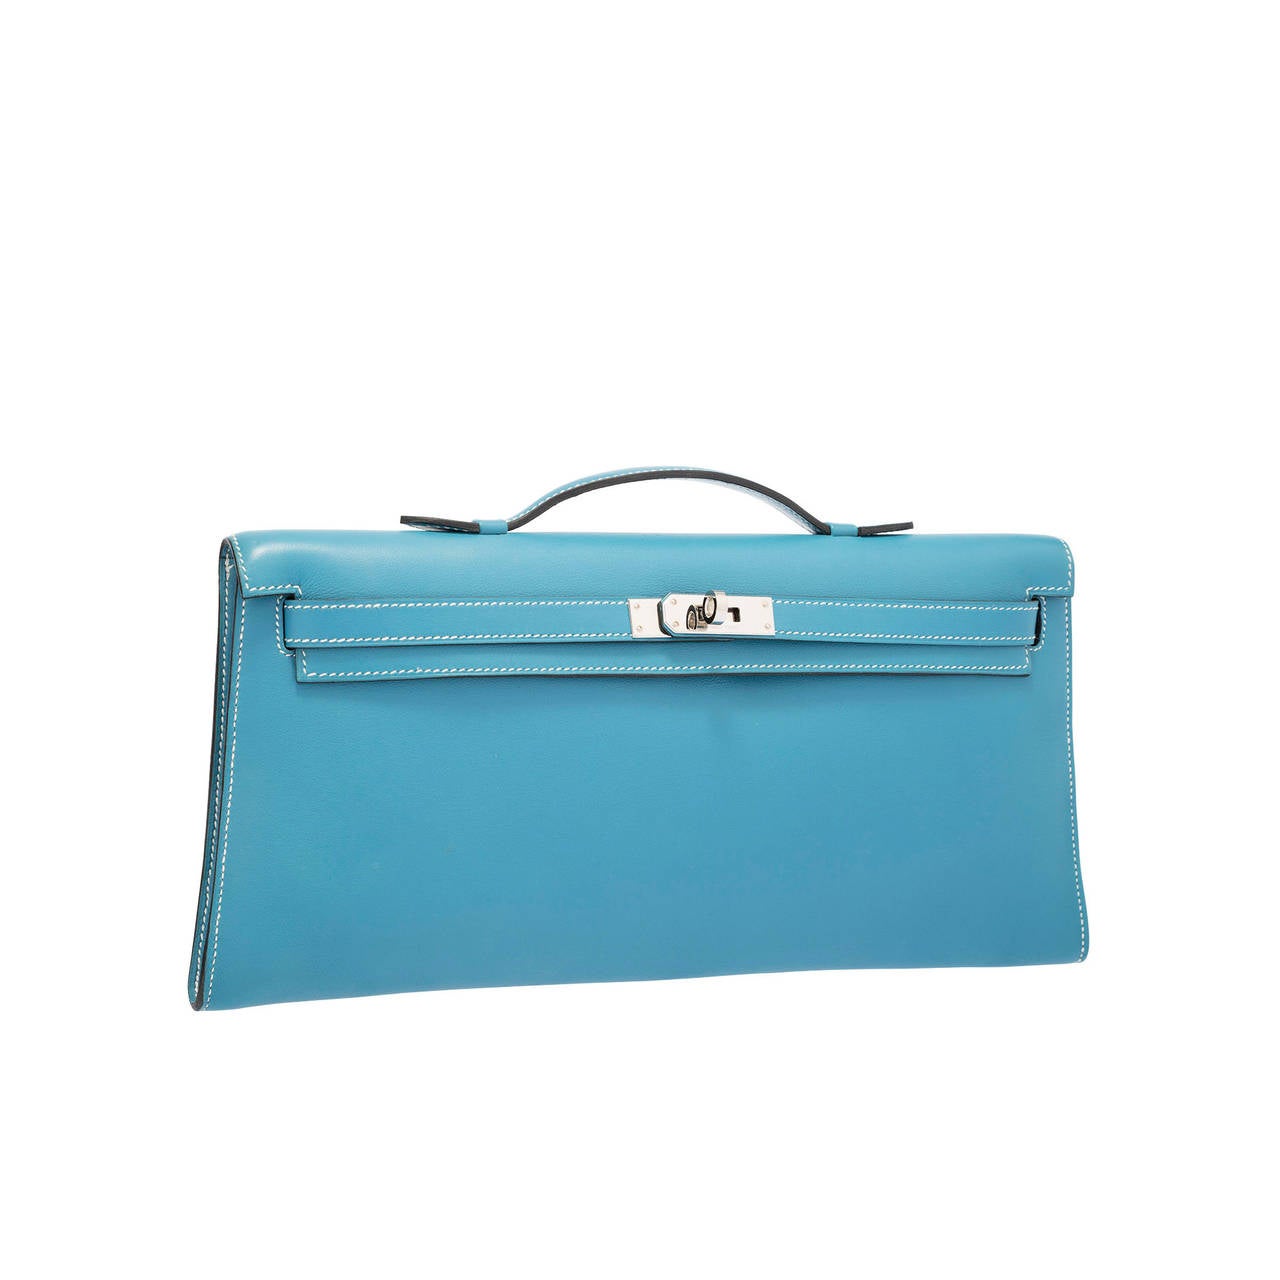 Hermes Blue Jean Swift Leather Kelly Longue Clutch Bag with Palladium Hardware For Sale